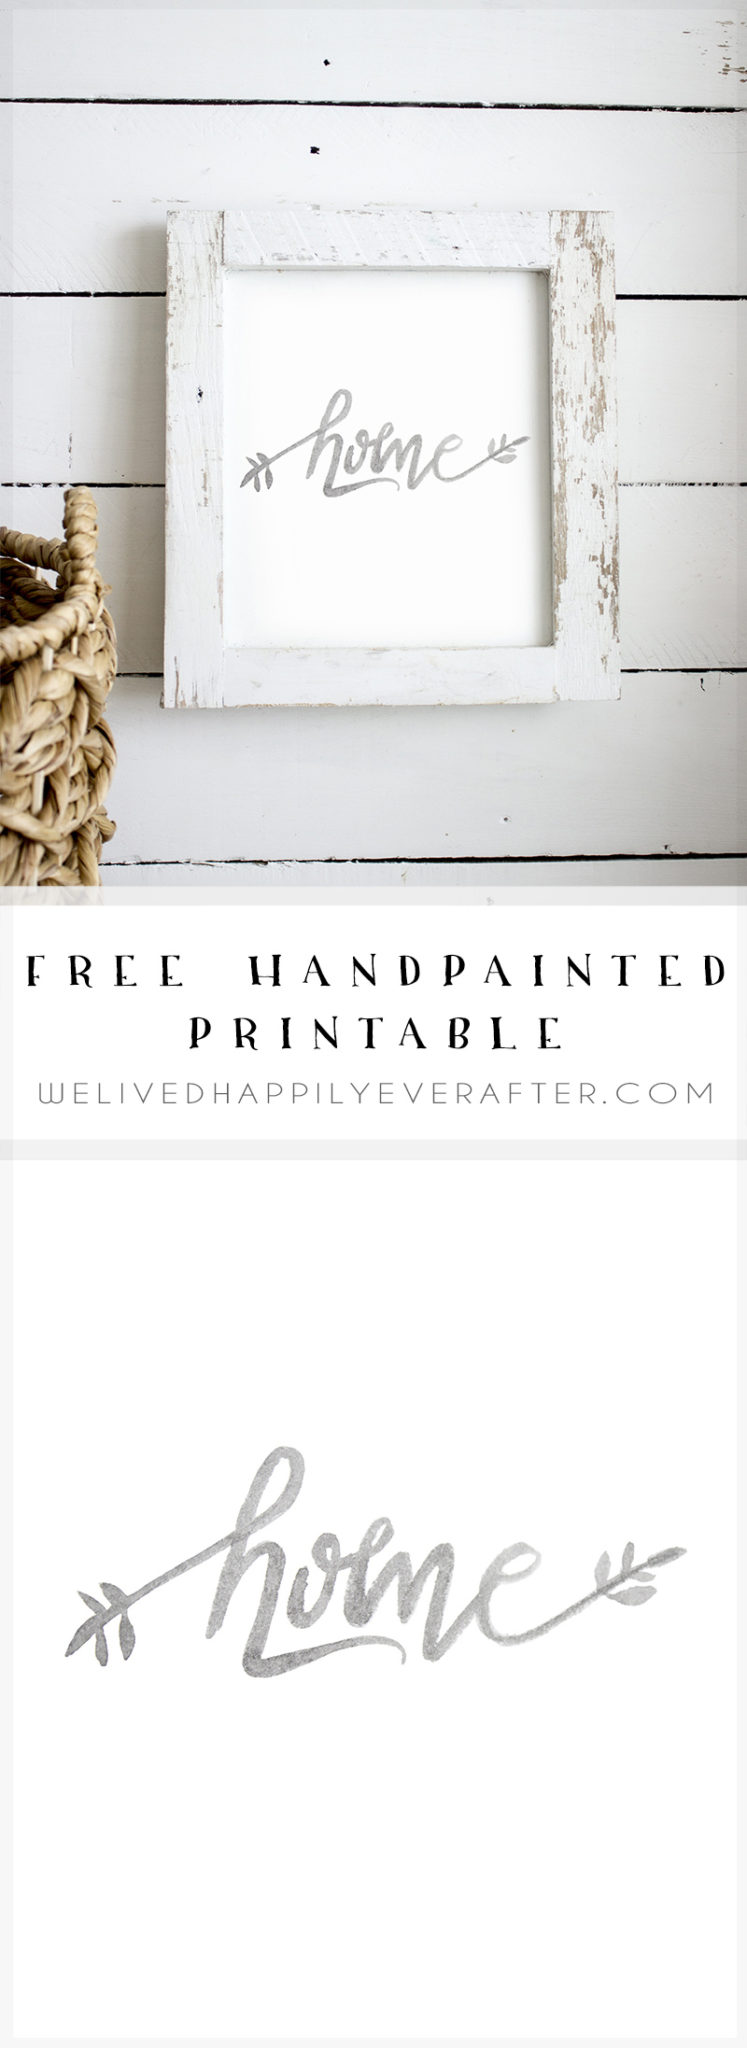 Home Sweet Home Free Printable - Fixer Upper Style Modern Farmhouse Watercolor Printable for Home Decor Gallery Walls